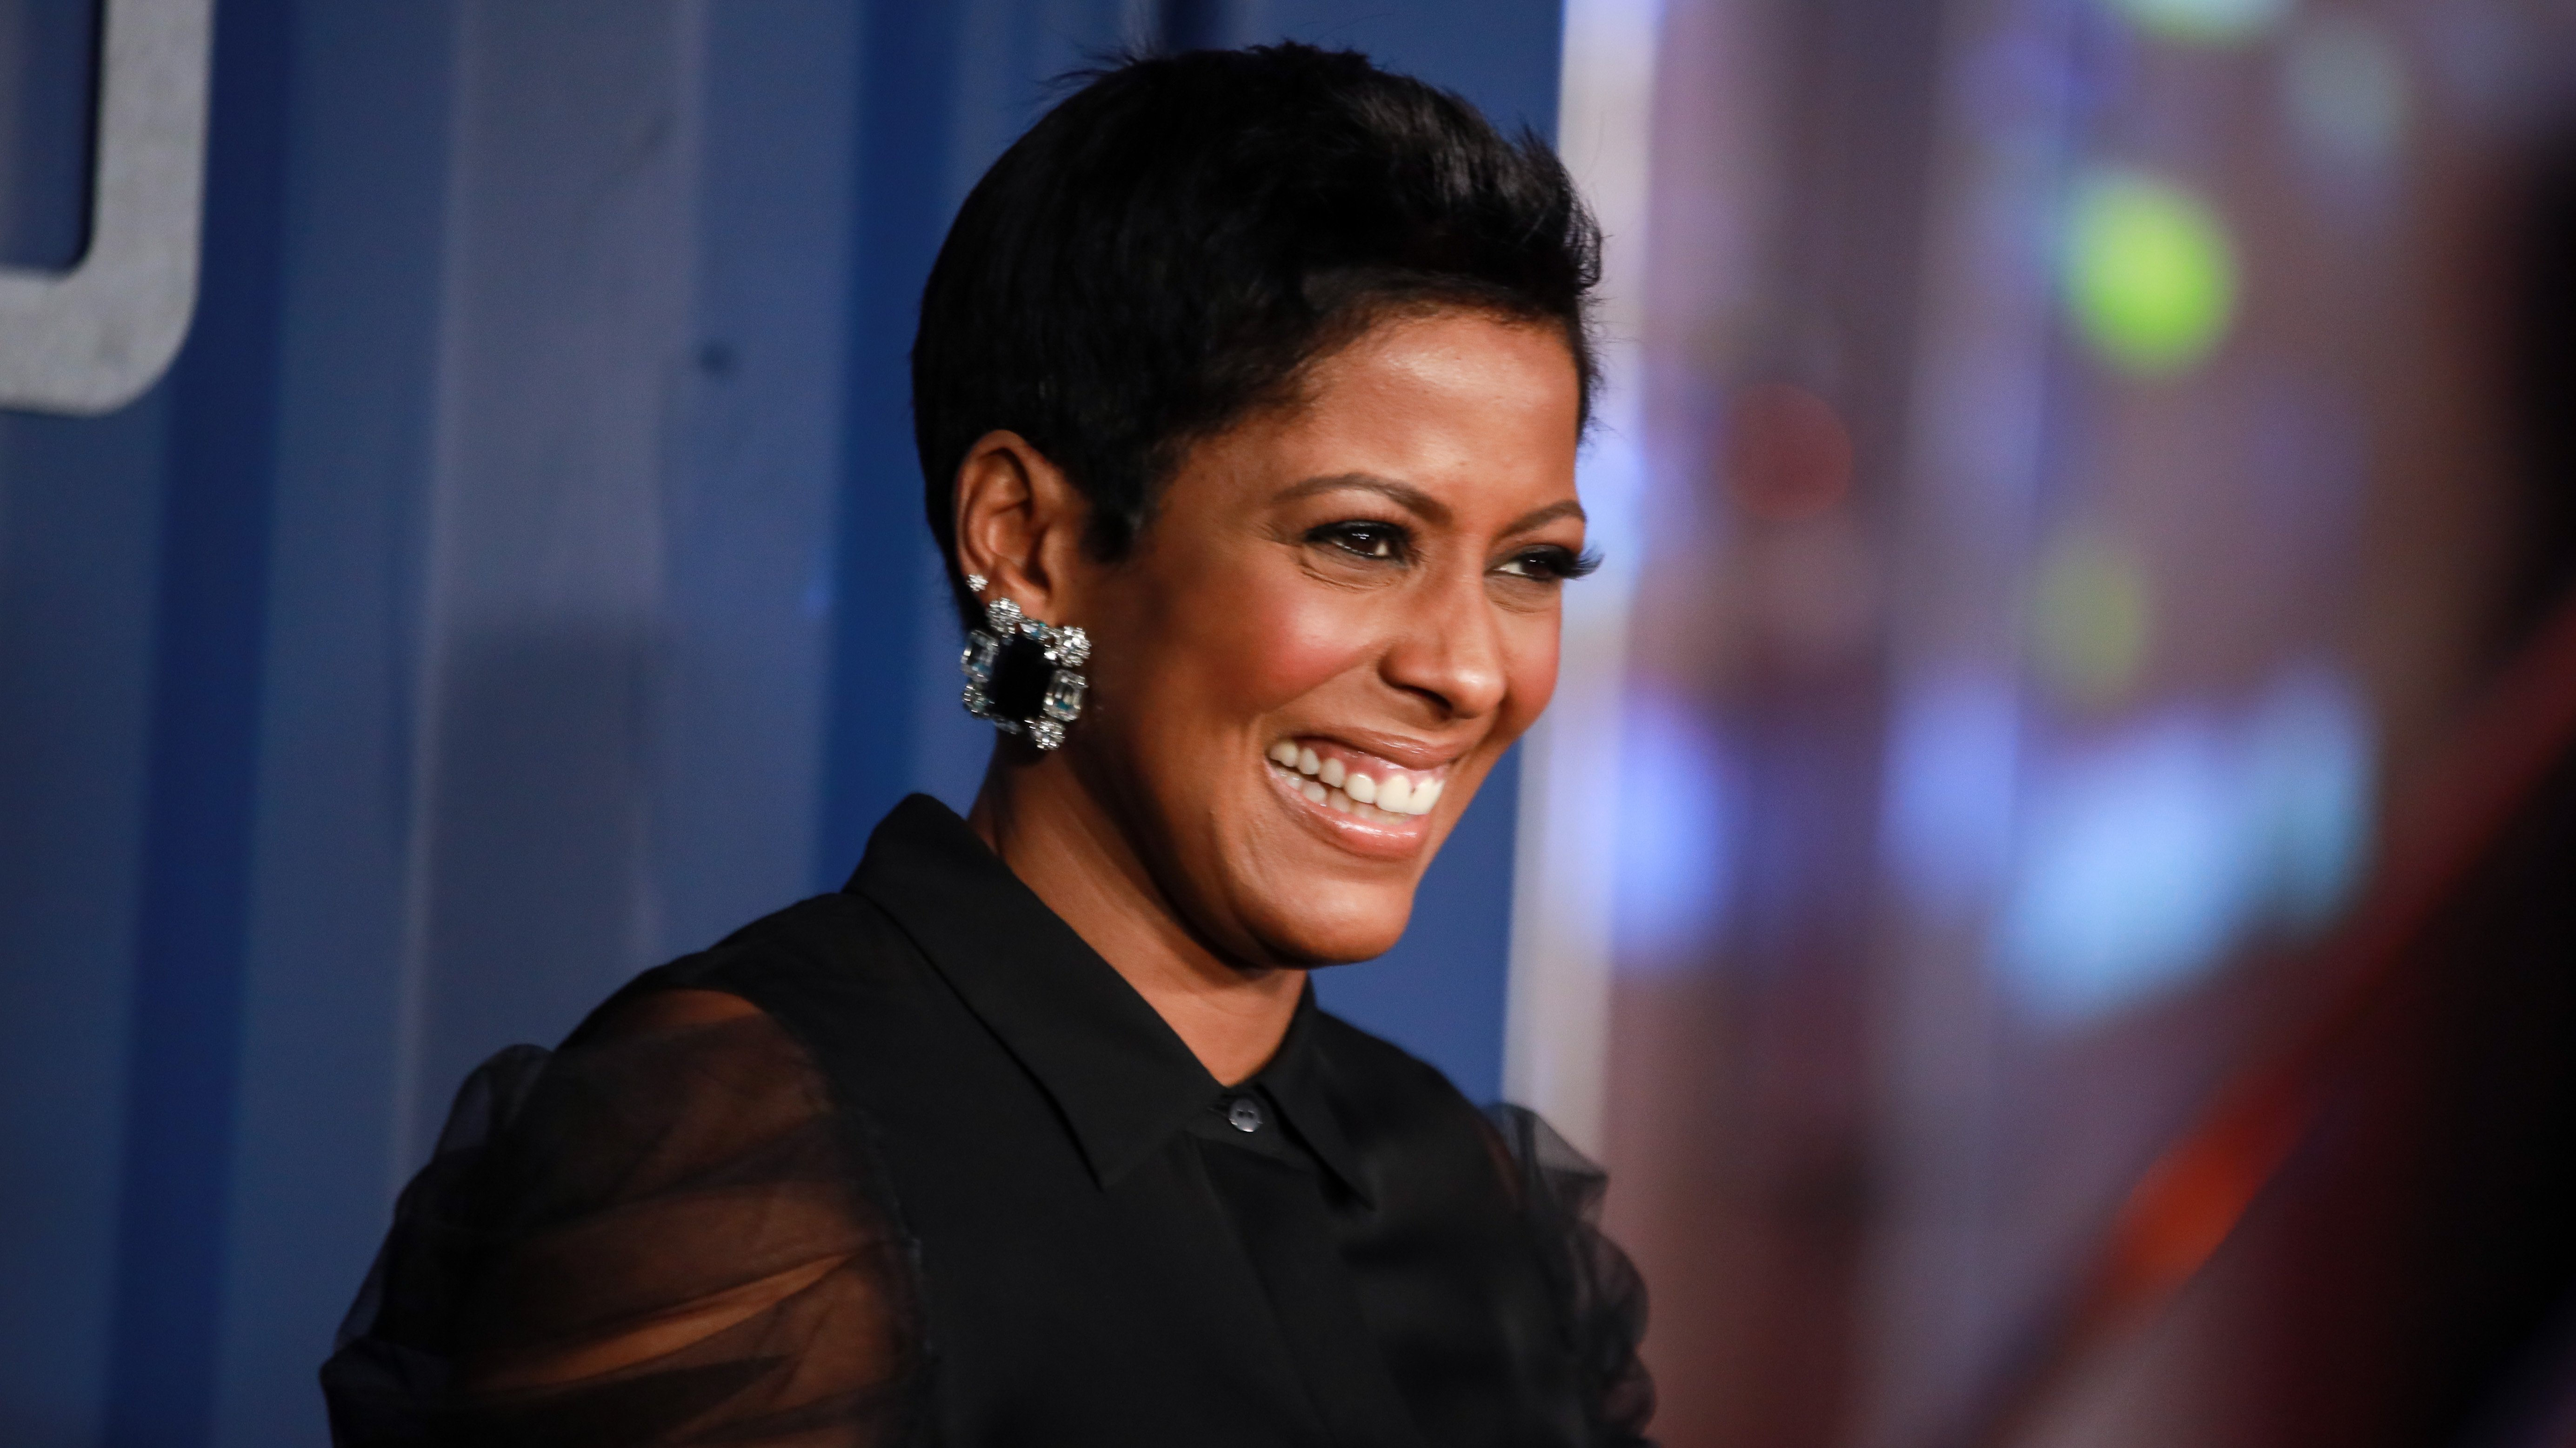 Tamron Hall at the New York premier of Netflix's "6 Underground" at The Shed on December 10, 2019 in New York City.| Source: Getty Images